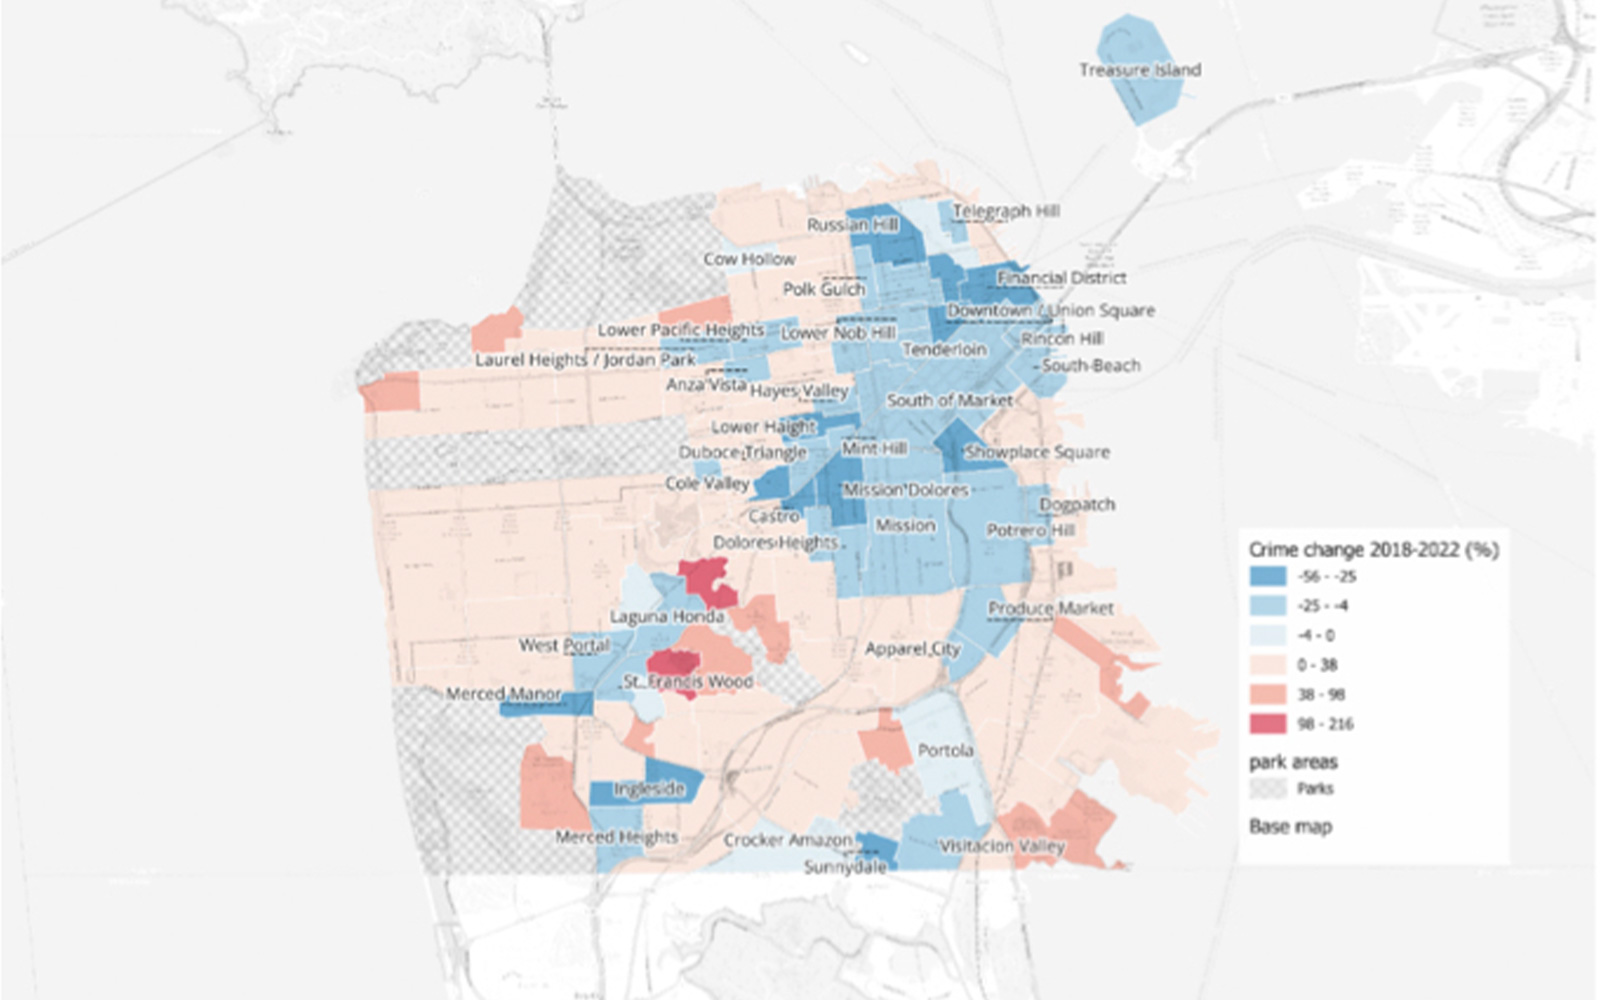 Connecting crime and CRE distress in San Francisco